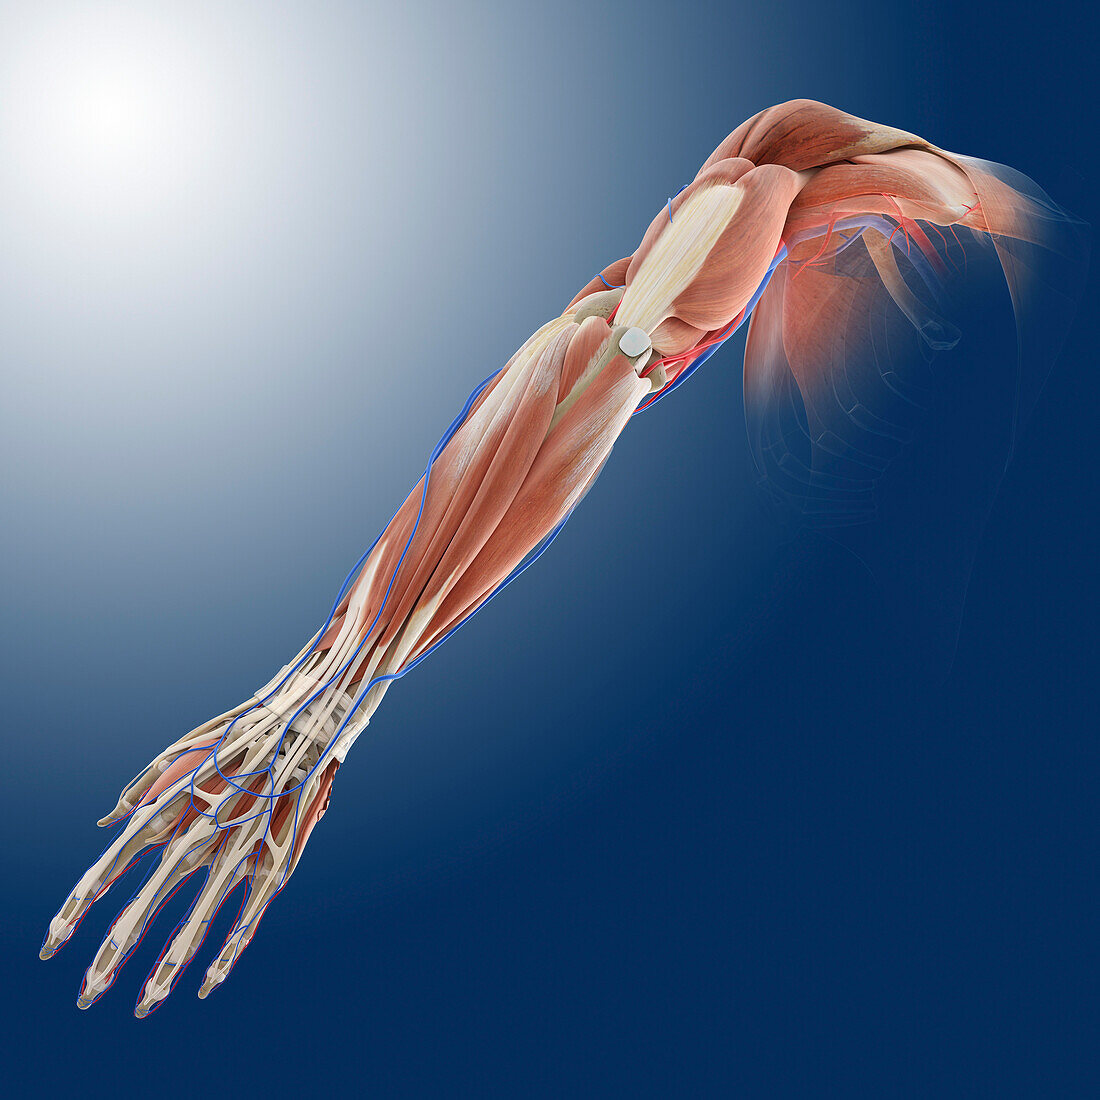 Posterior arm muscles,artwork